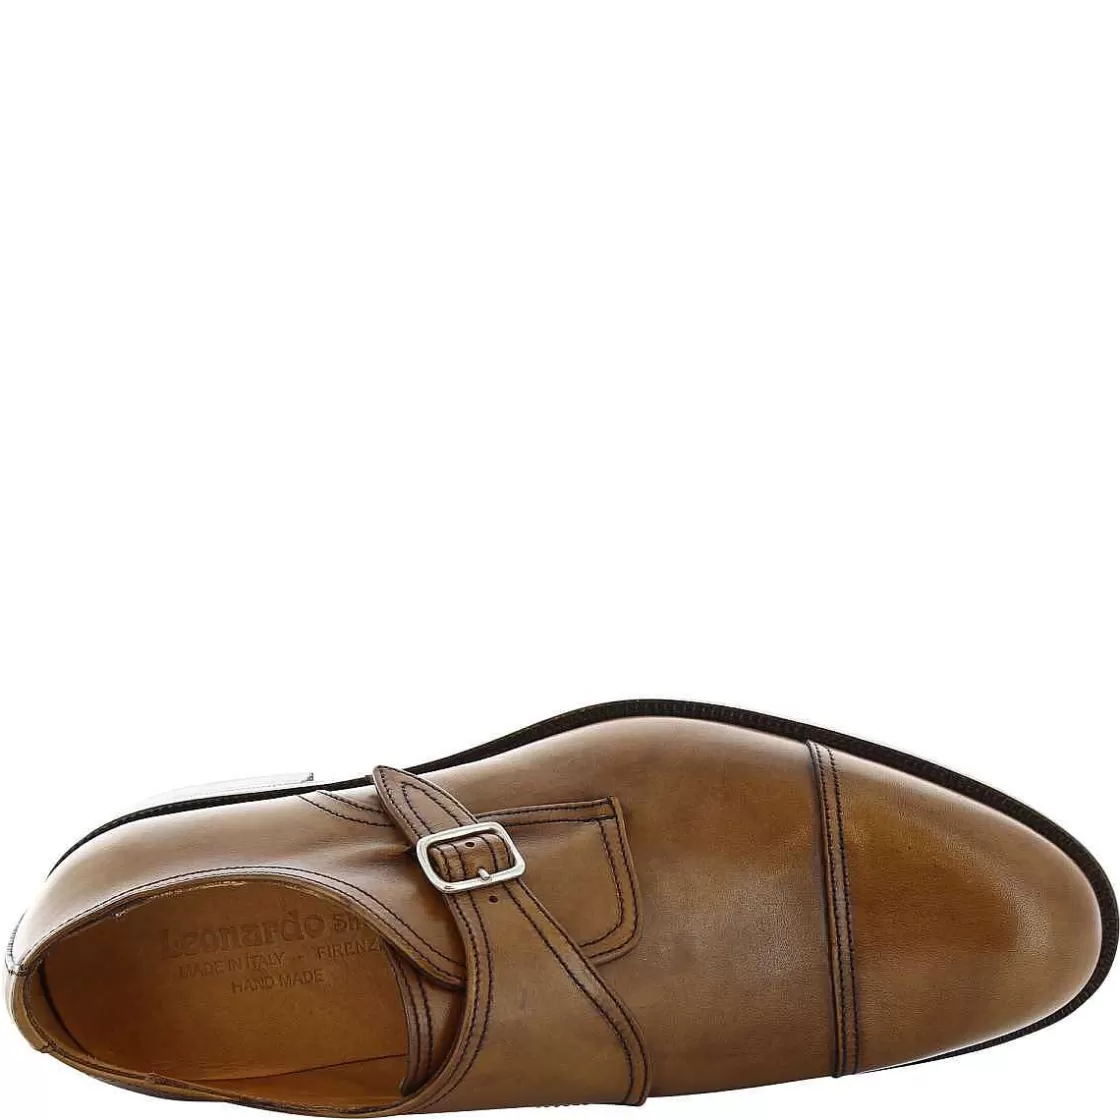 Leonardo Men'S Shoes In Tan Leather Handmade With Buckle Closure Online